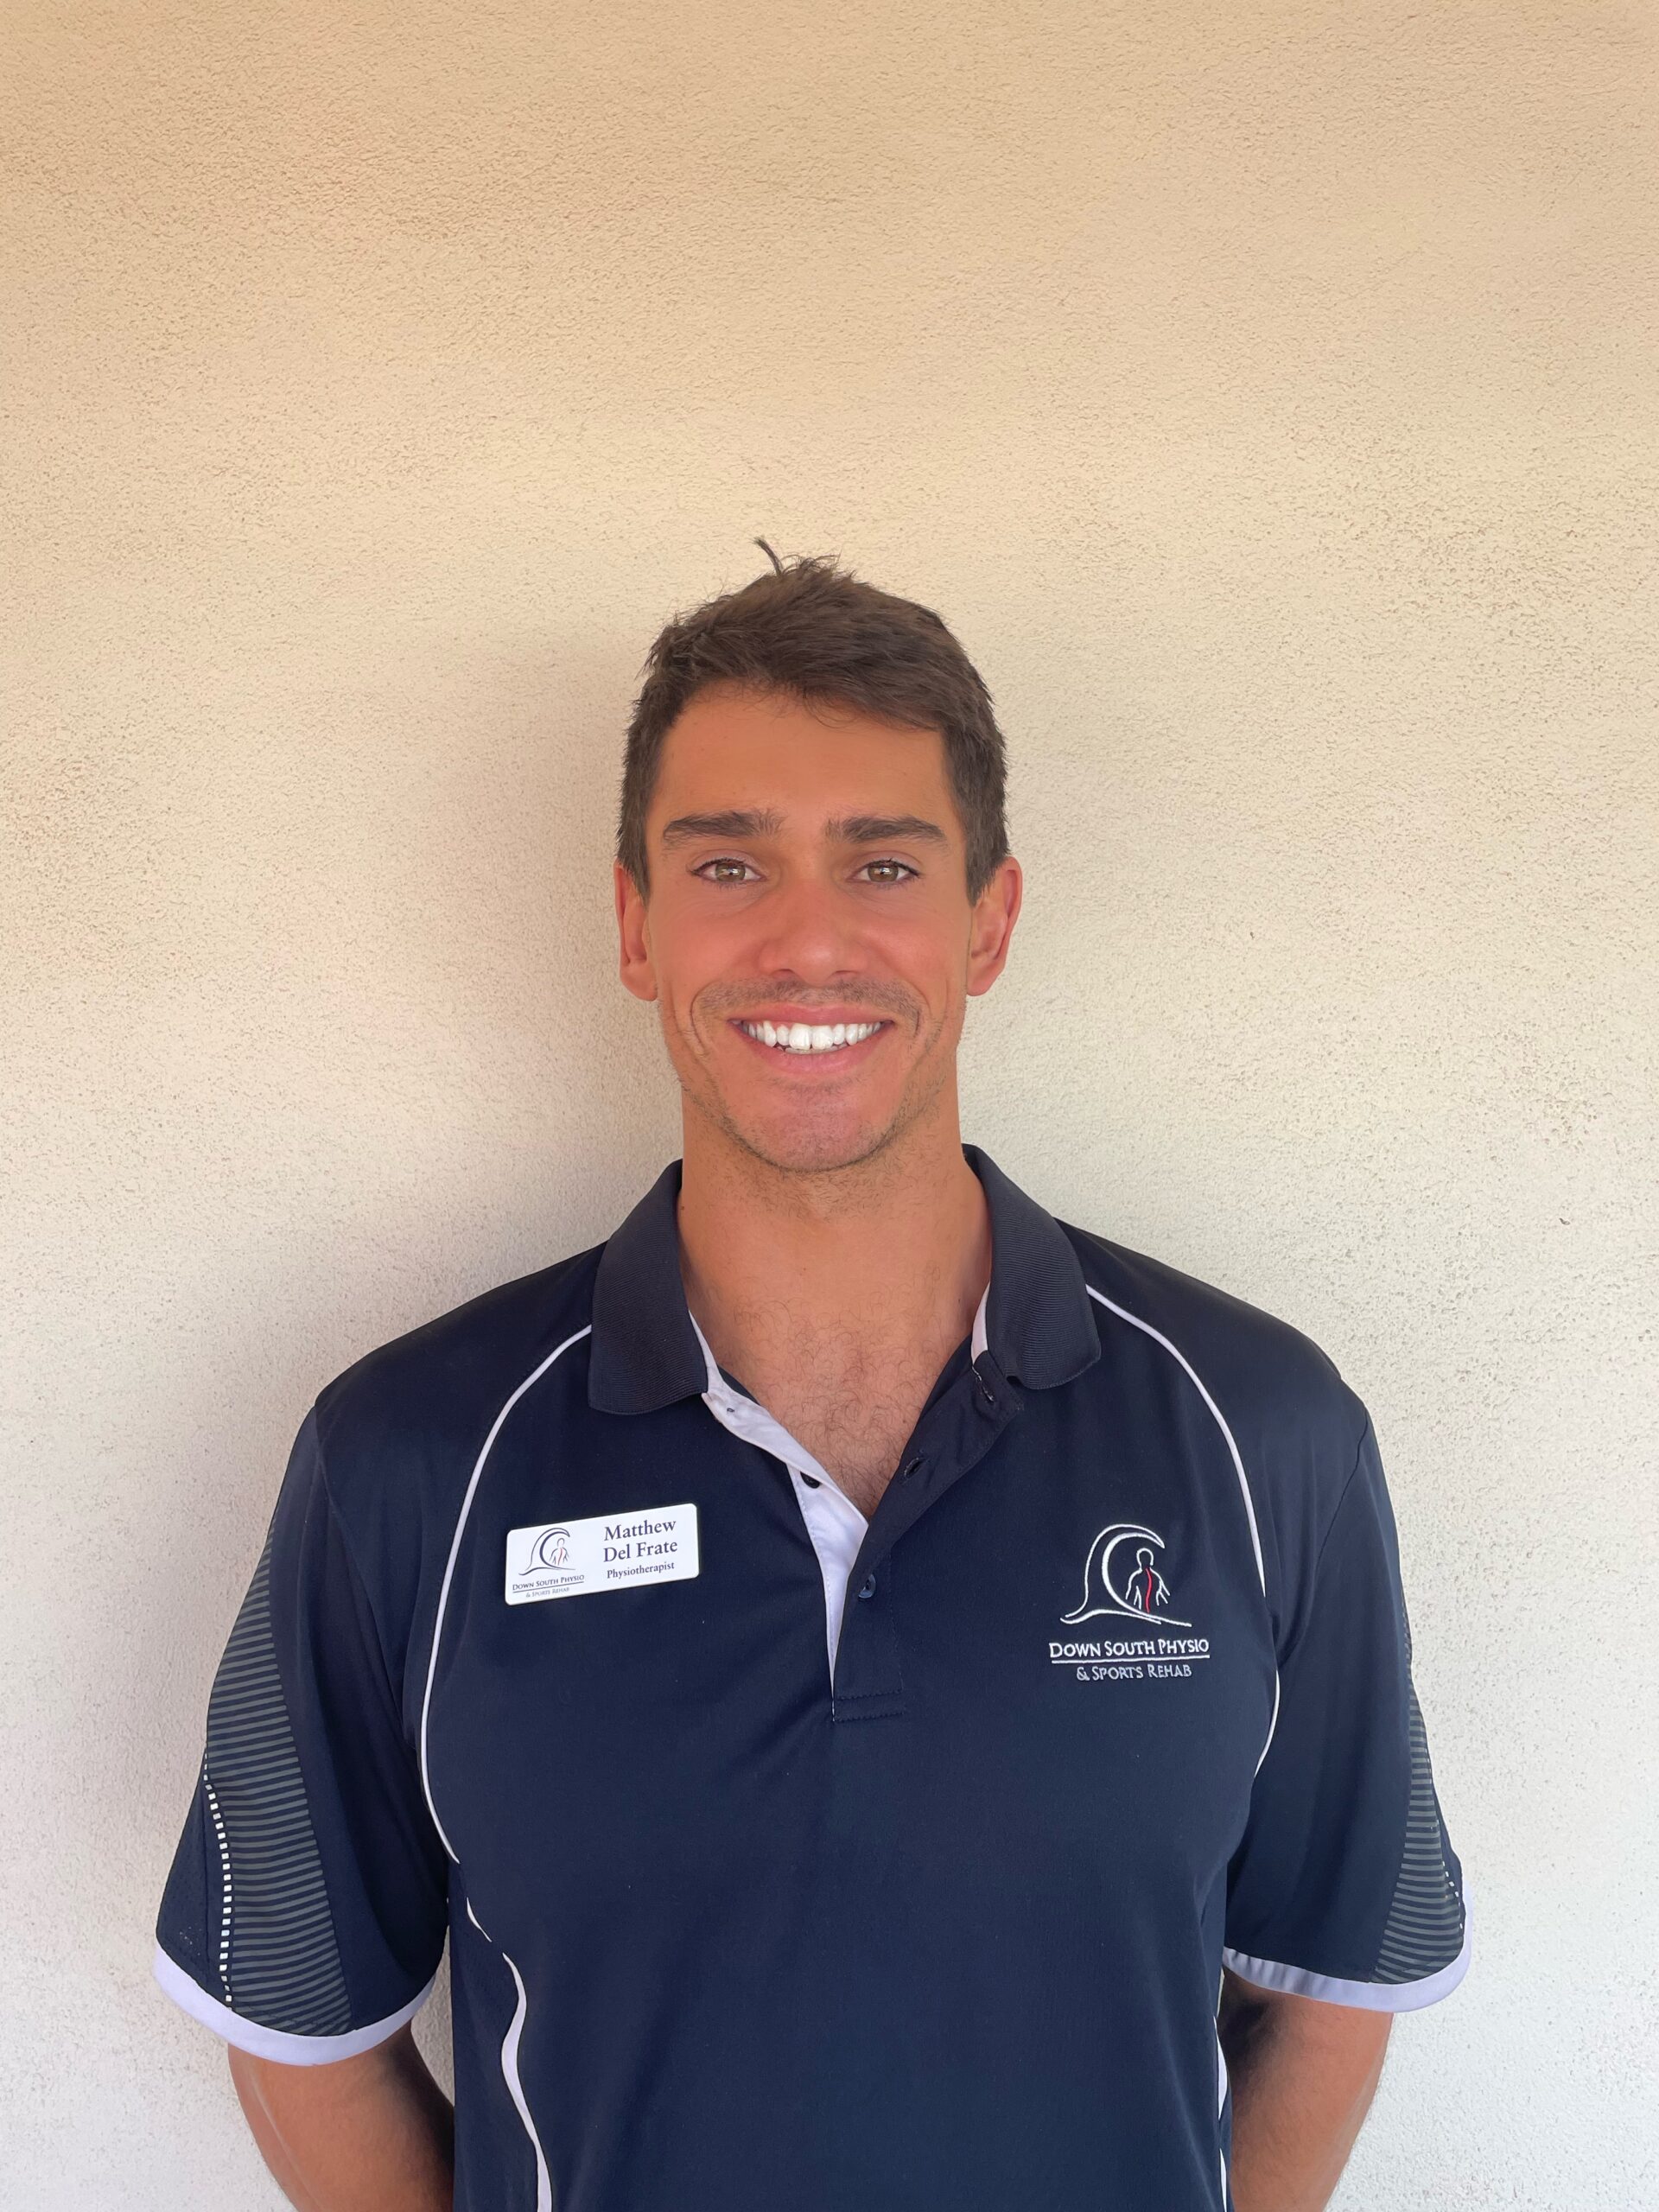 Danica Bailey Manipulative Physiotherapist Down South Physiotherapy Dunsborough. Experienced Sports Physiotherapists also specialising in surfing injuries.